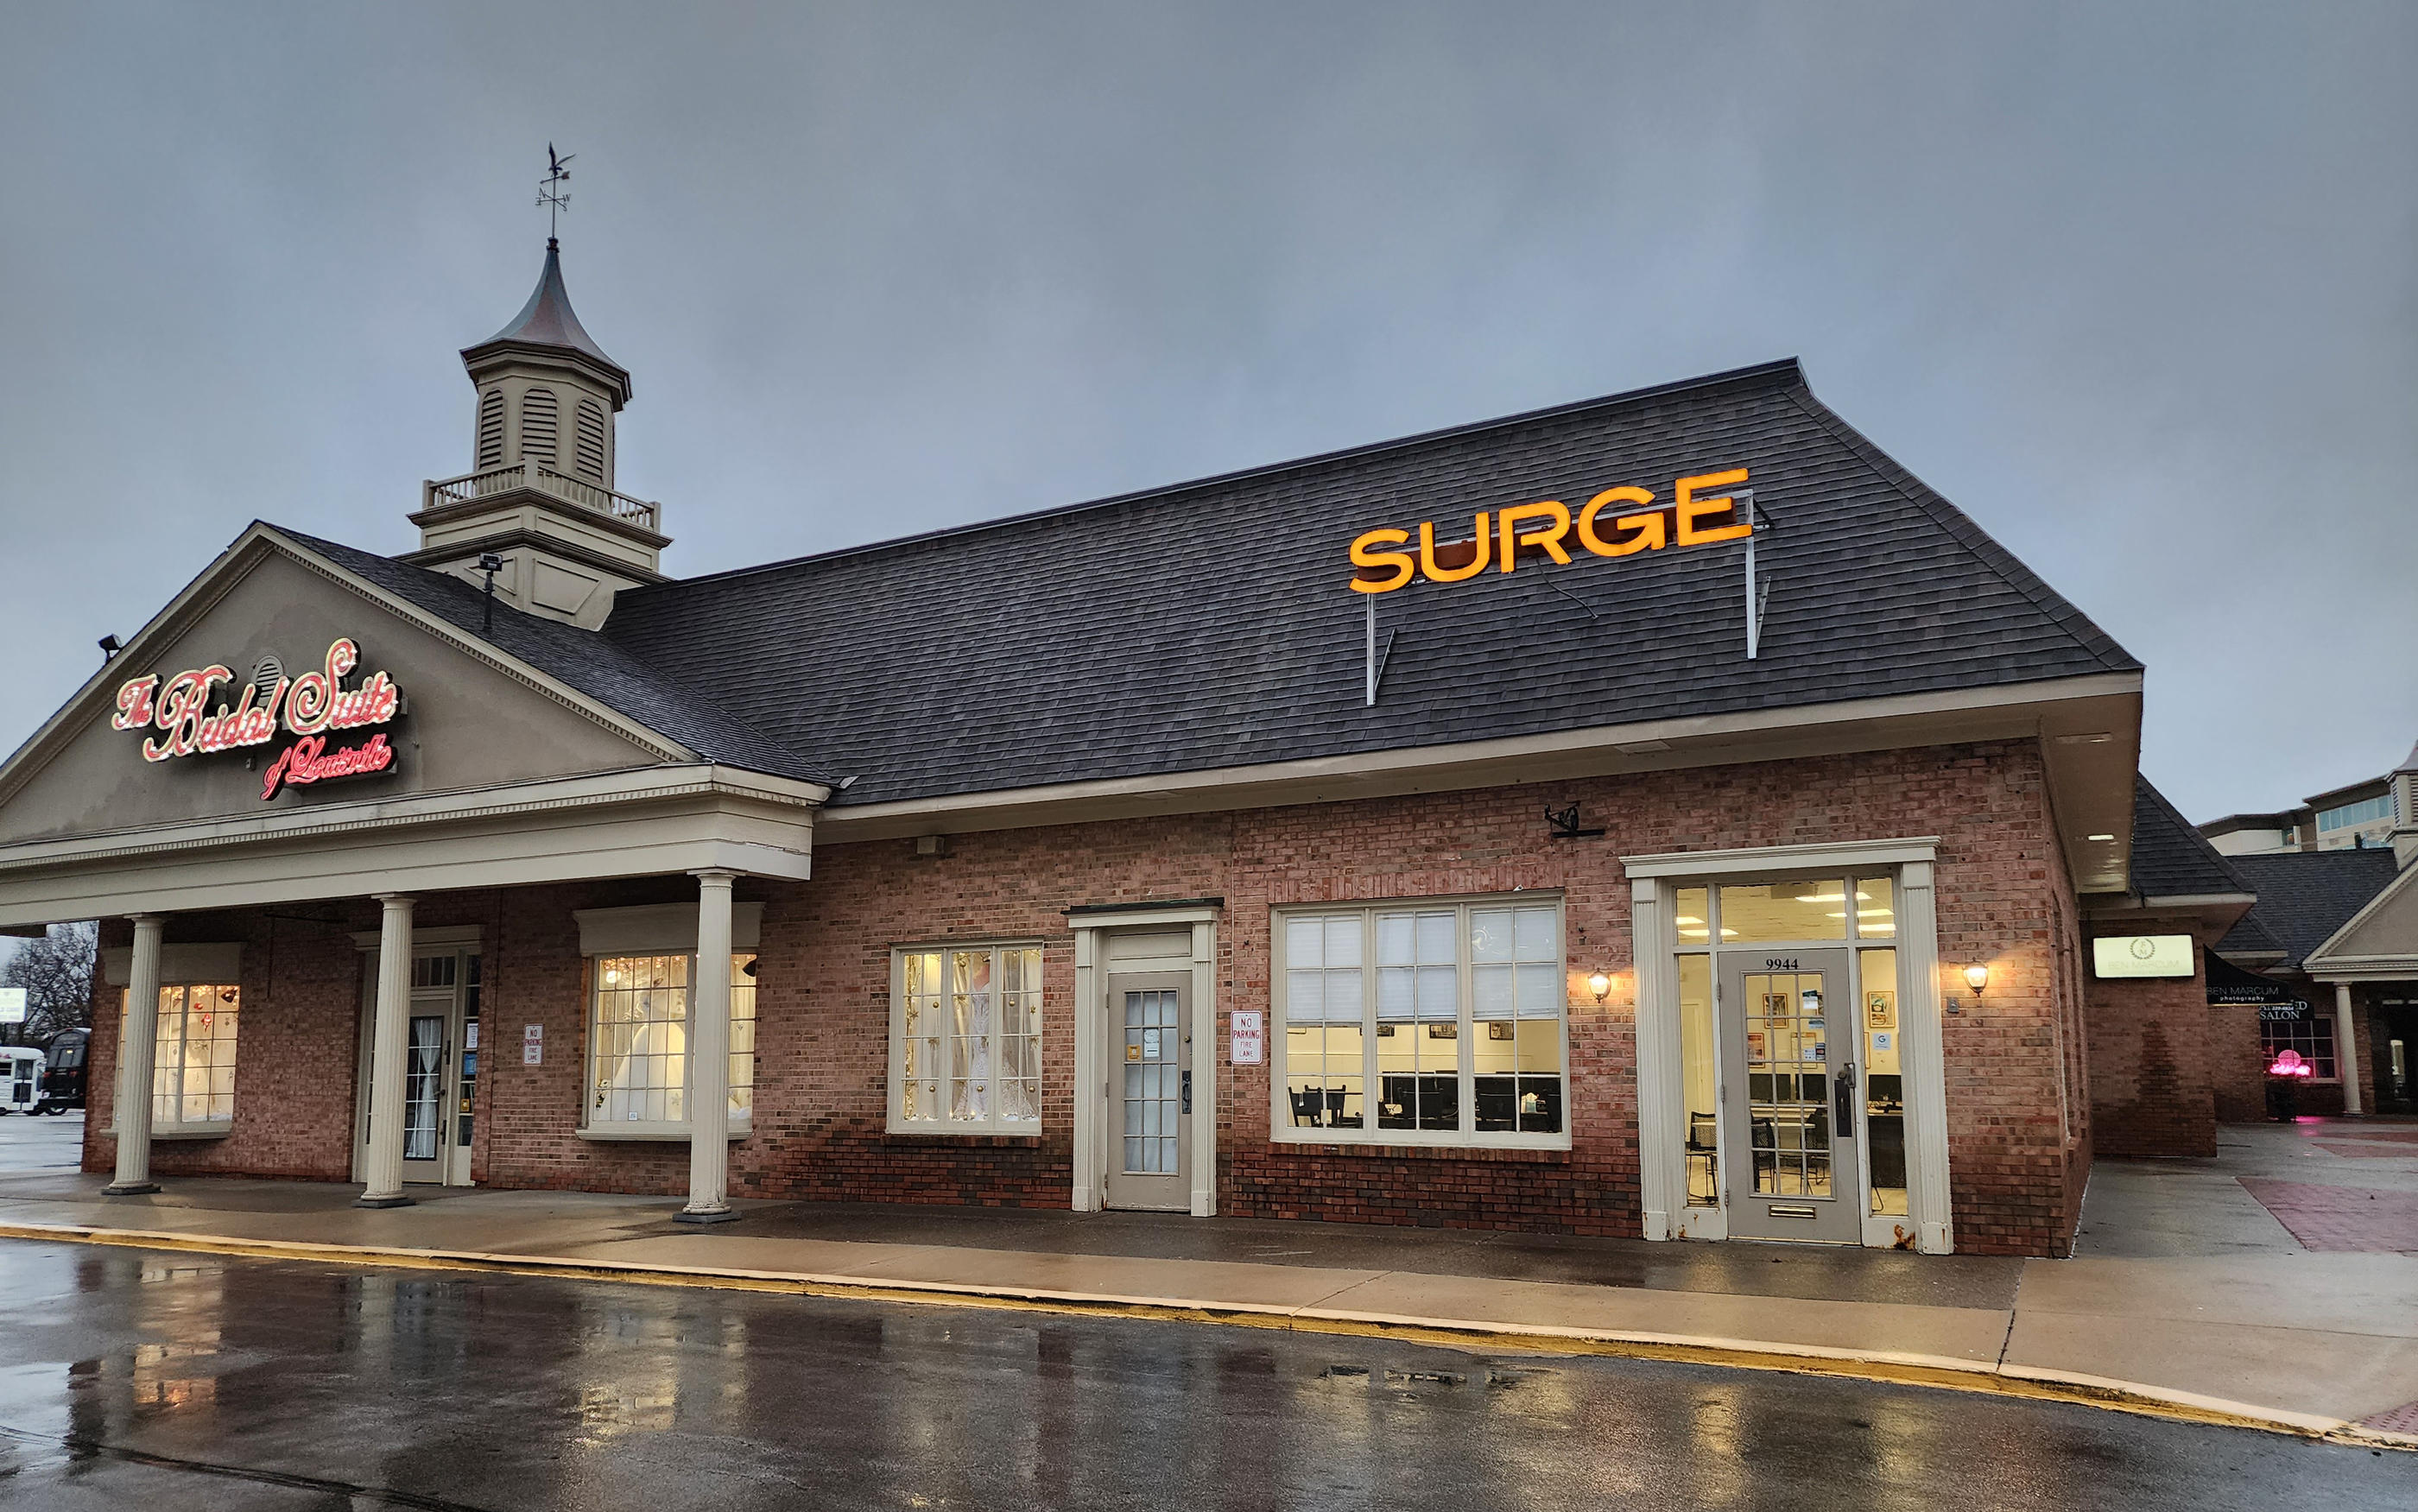 Looking for a job? Our Louisville, Kentucky SURGE Staffing branch has new positions that open up daily! You can contact our east Louisville branch and our staffing specialists will work closely with you to ensure we find a job that you love!